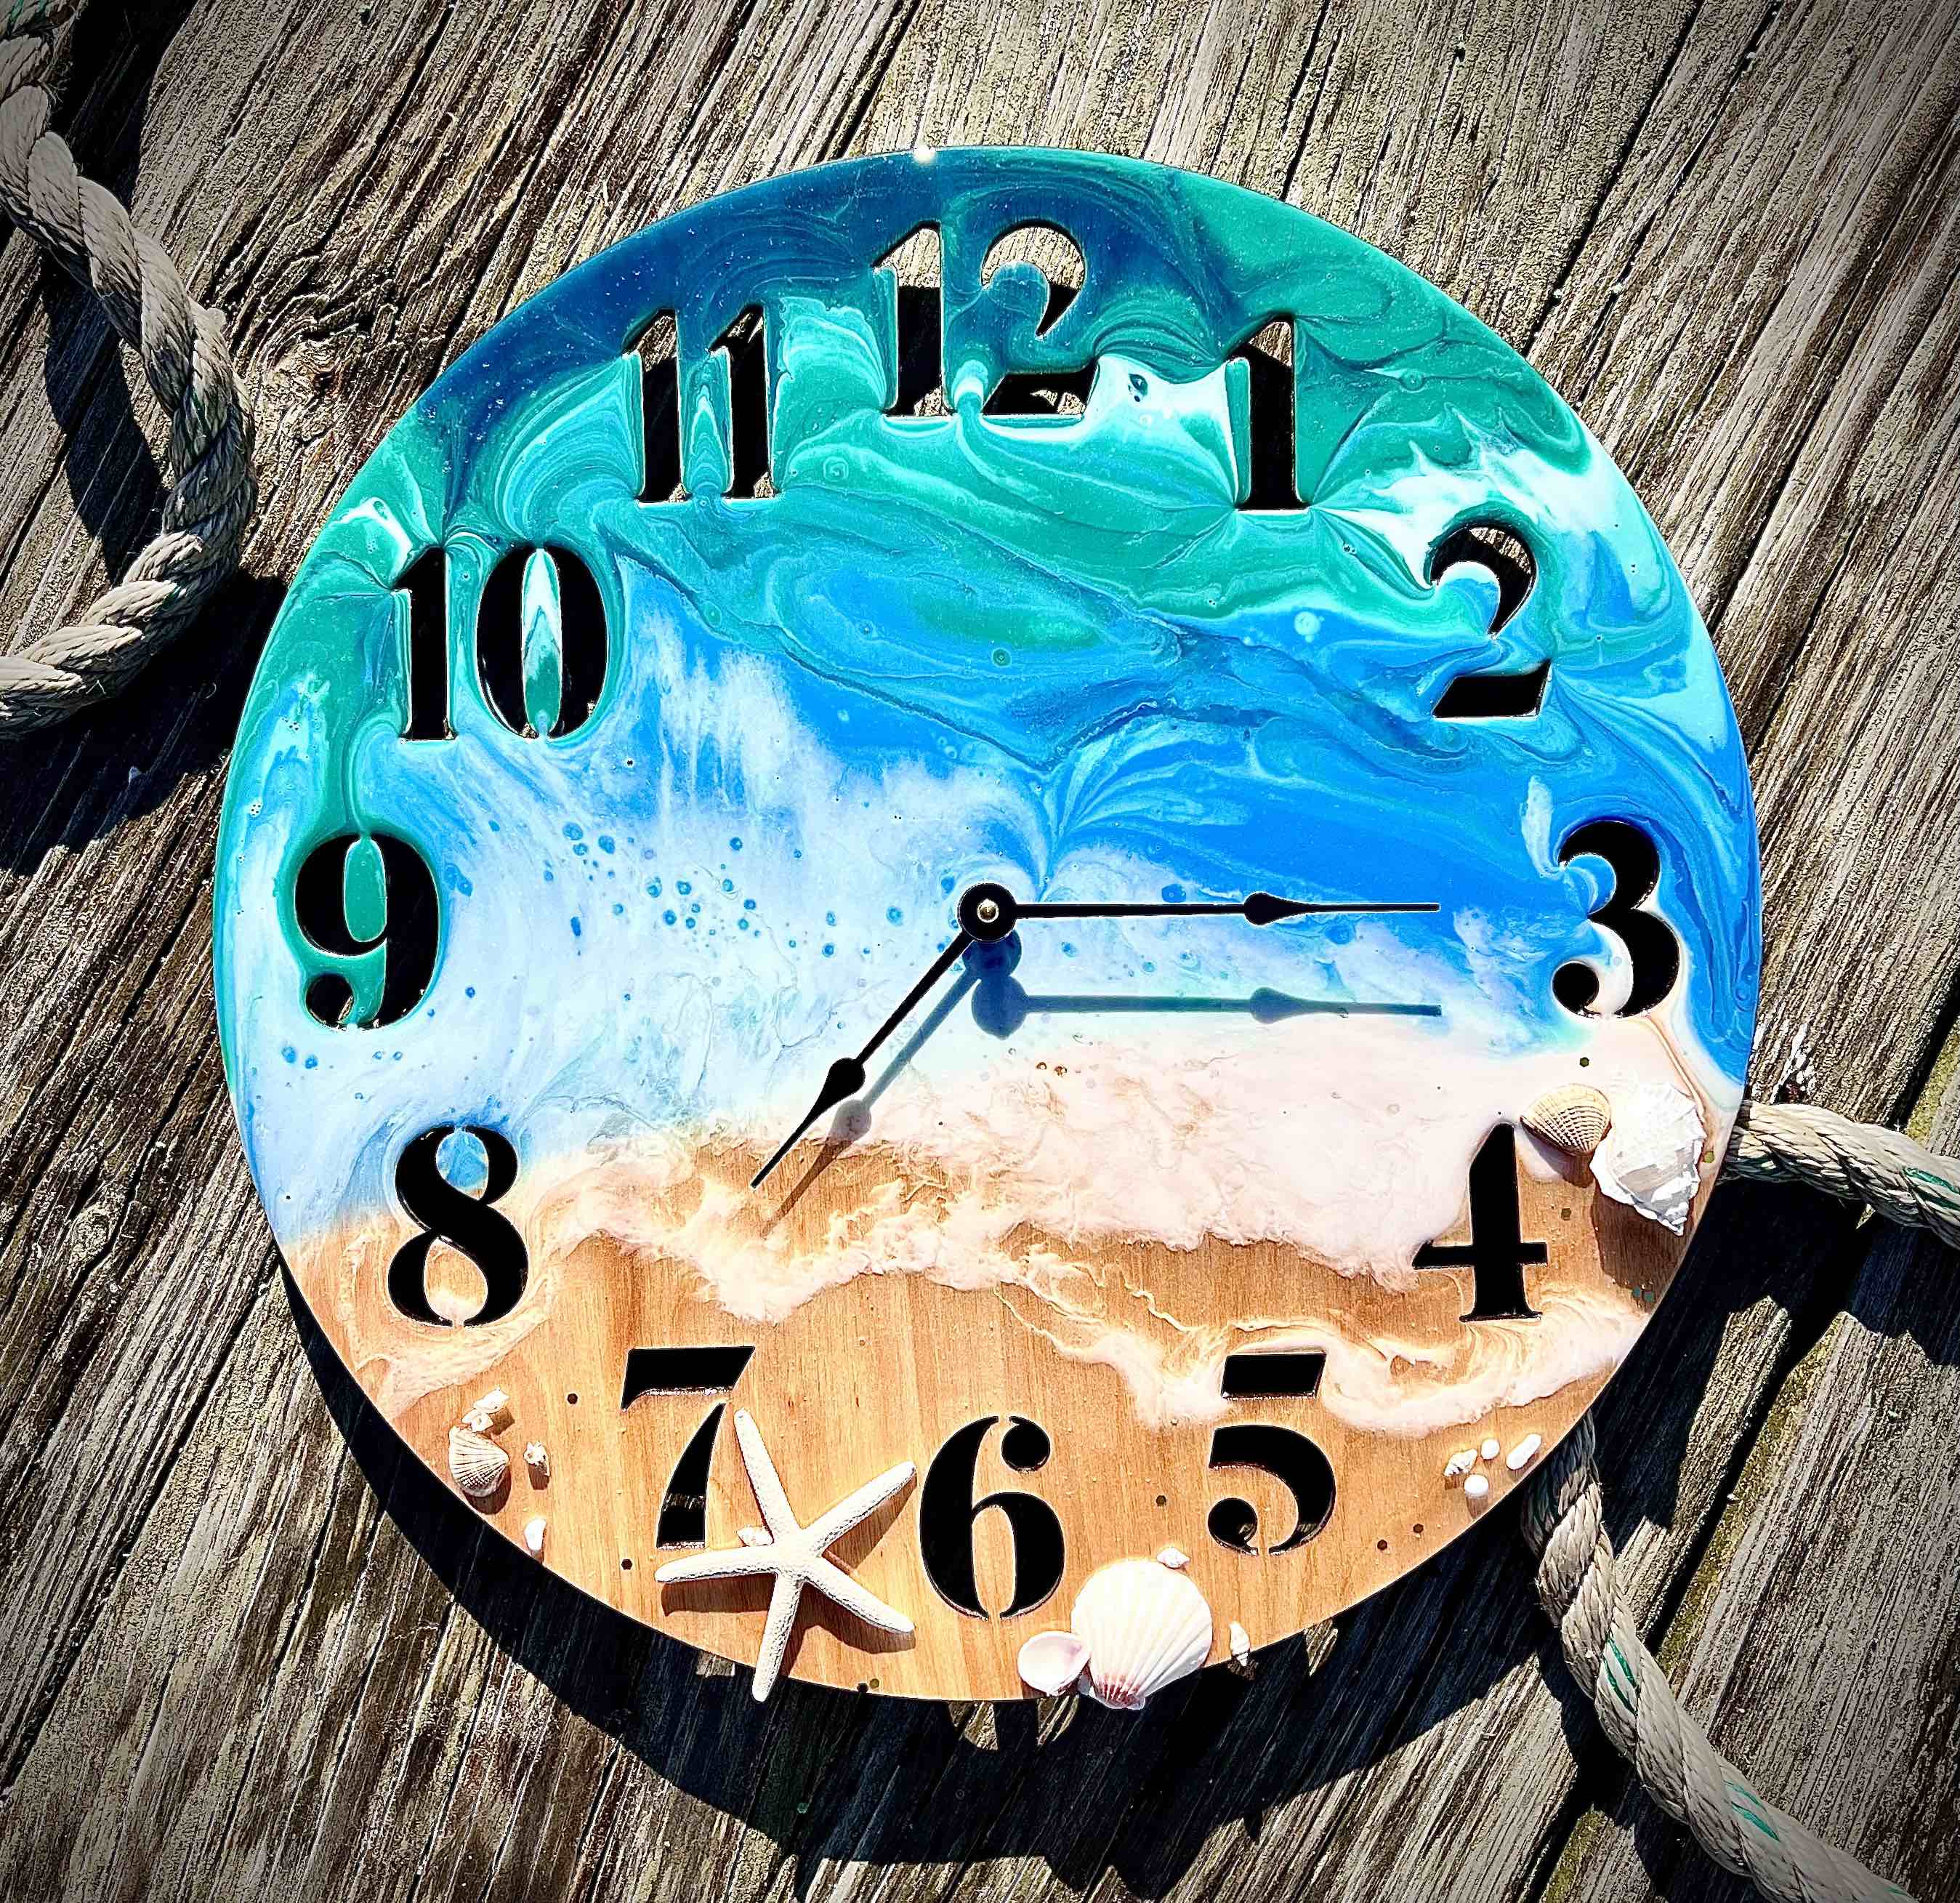 SOLD OUT! BRAND NEW! Resin Poured Ocean Clock